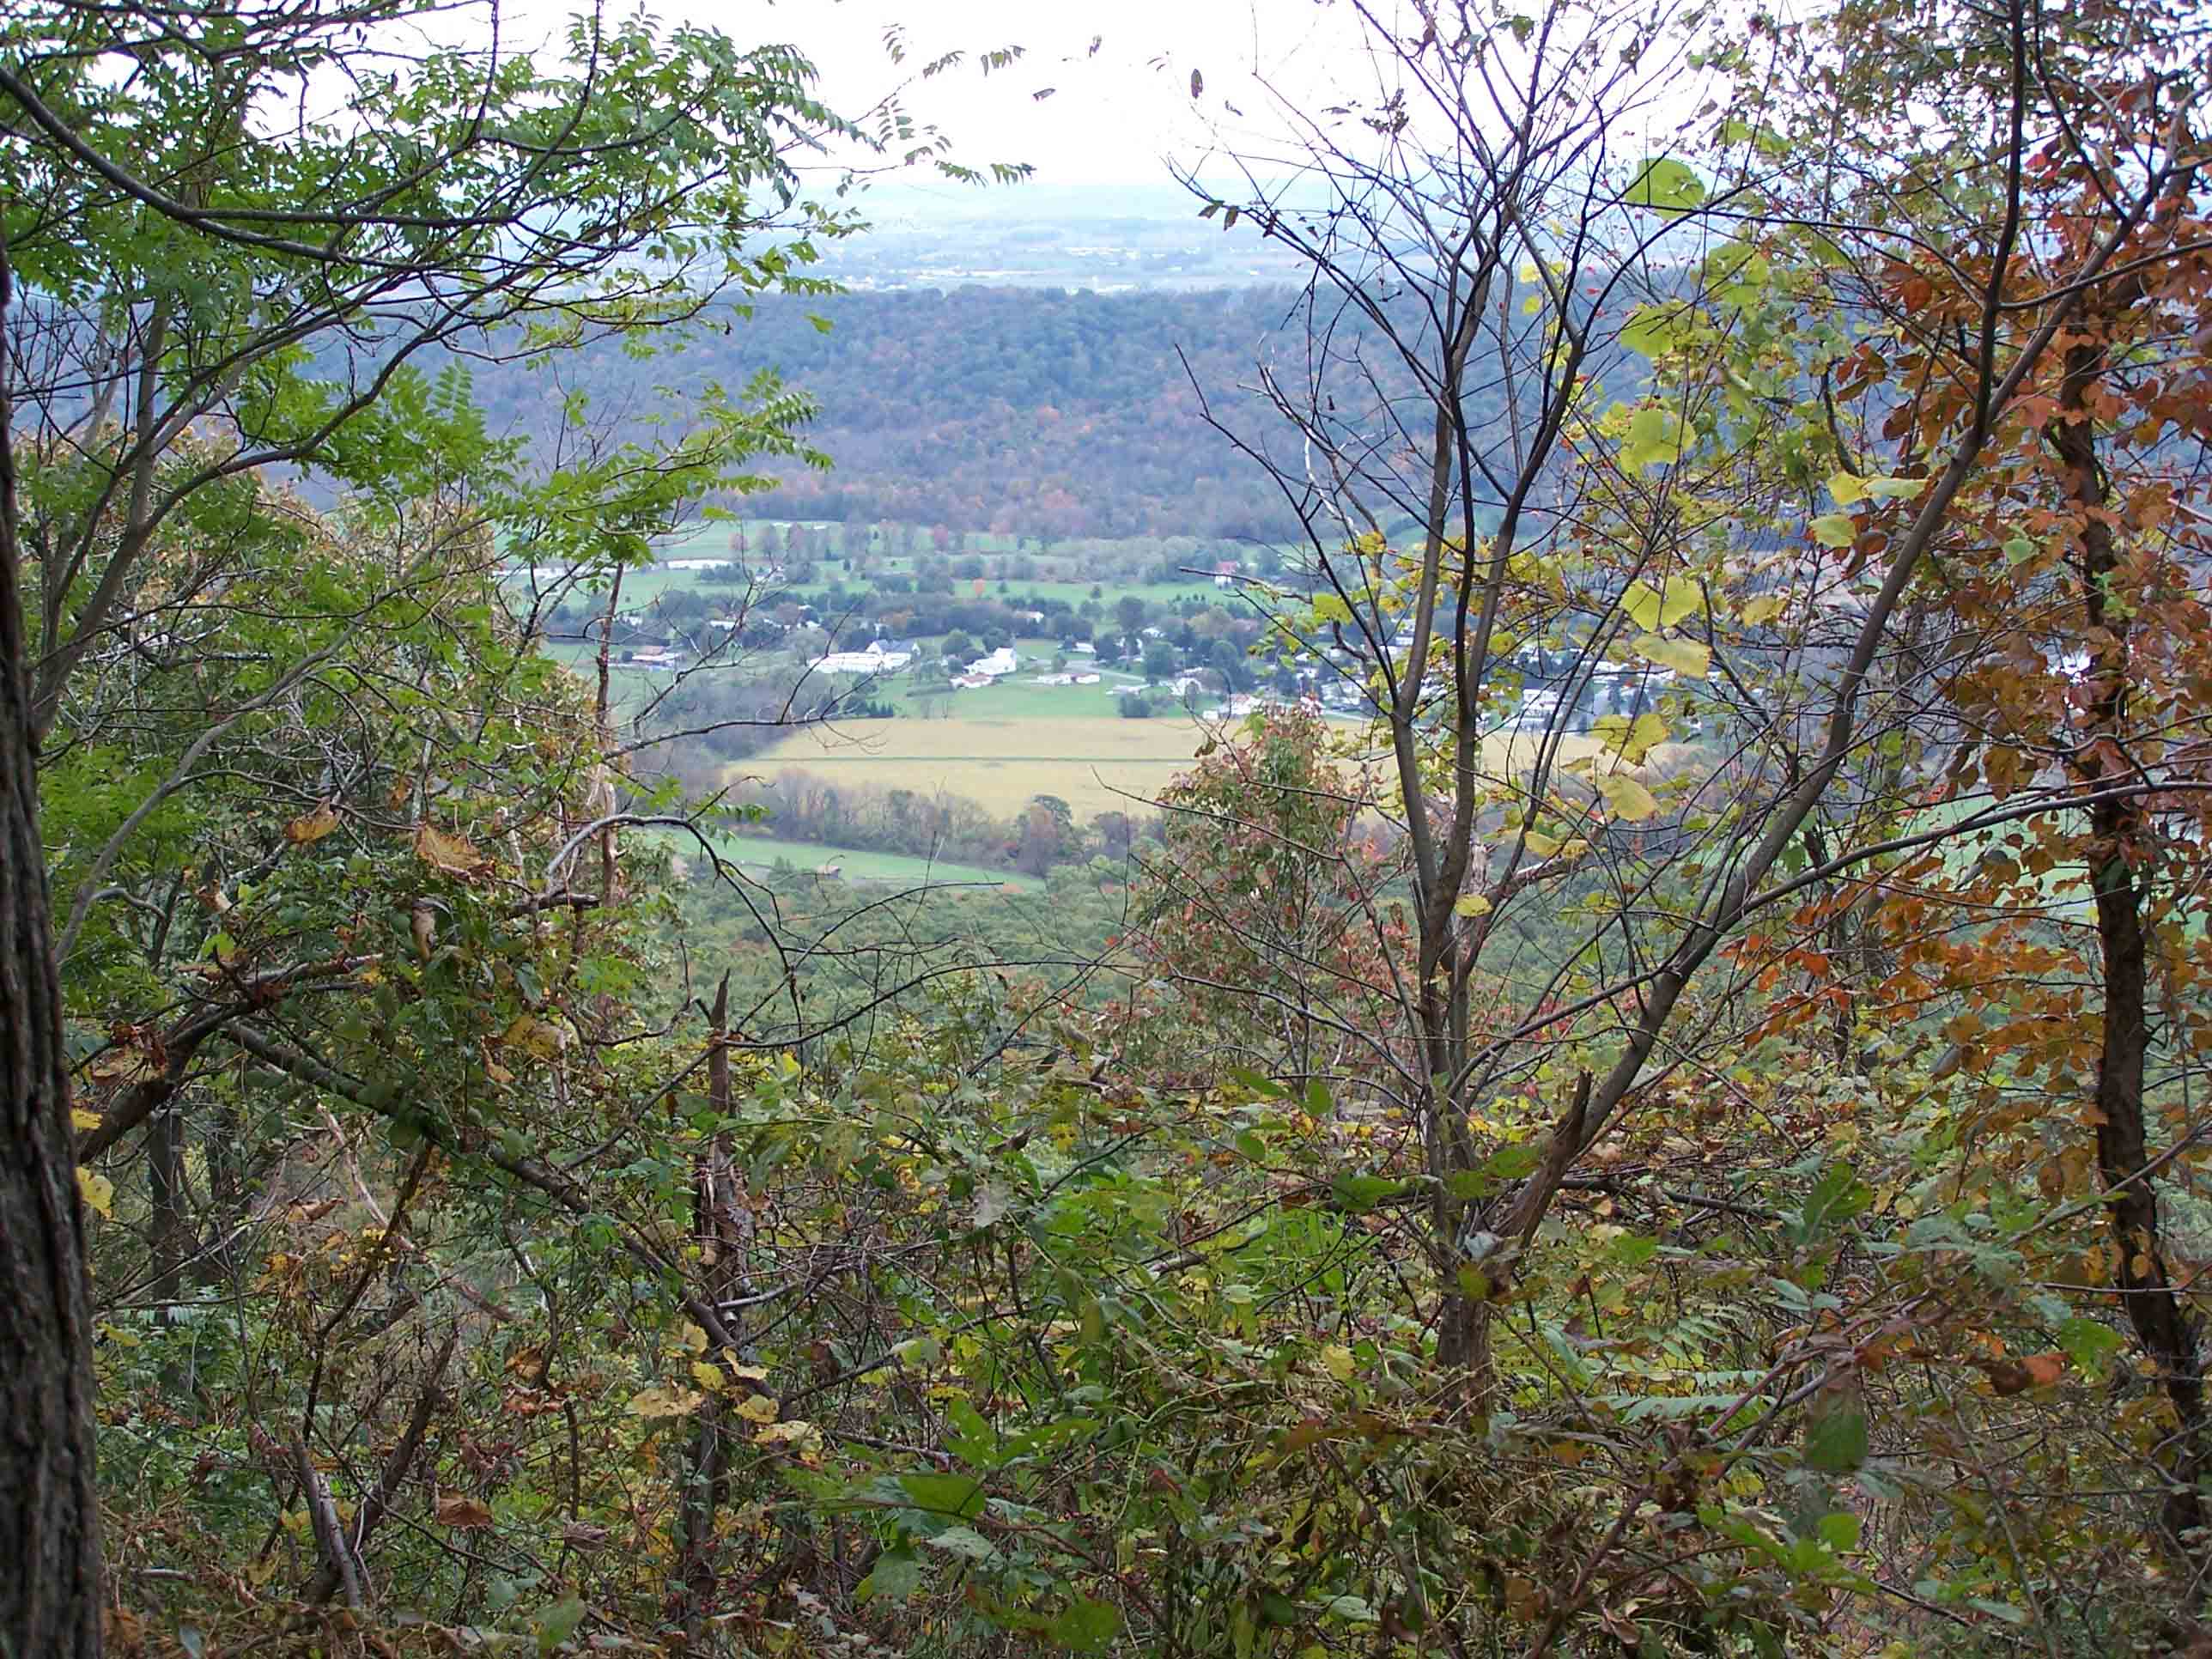 Trail views north of Swatara Gap - south of William Penn Shelter. Courtesy at@rohland.org